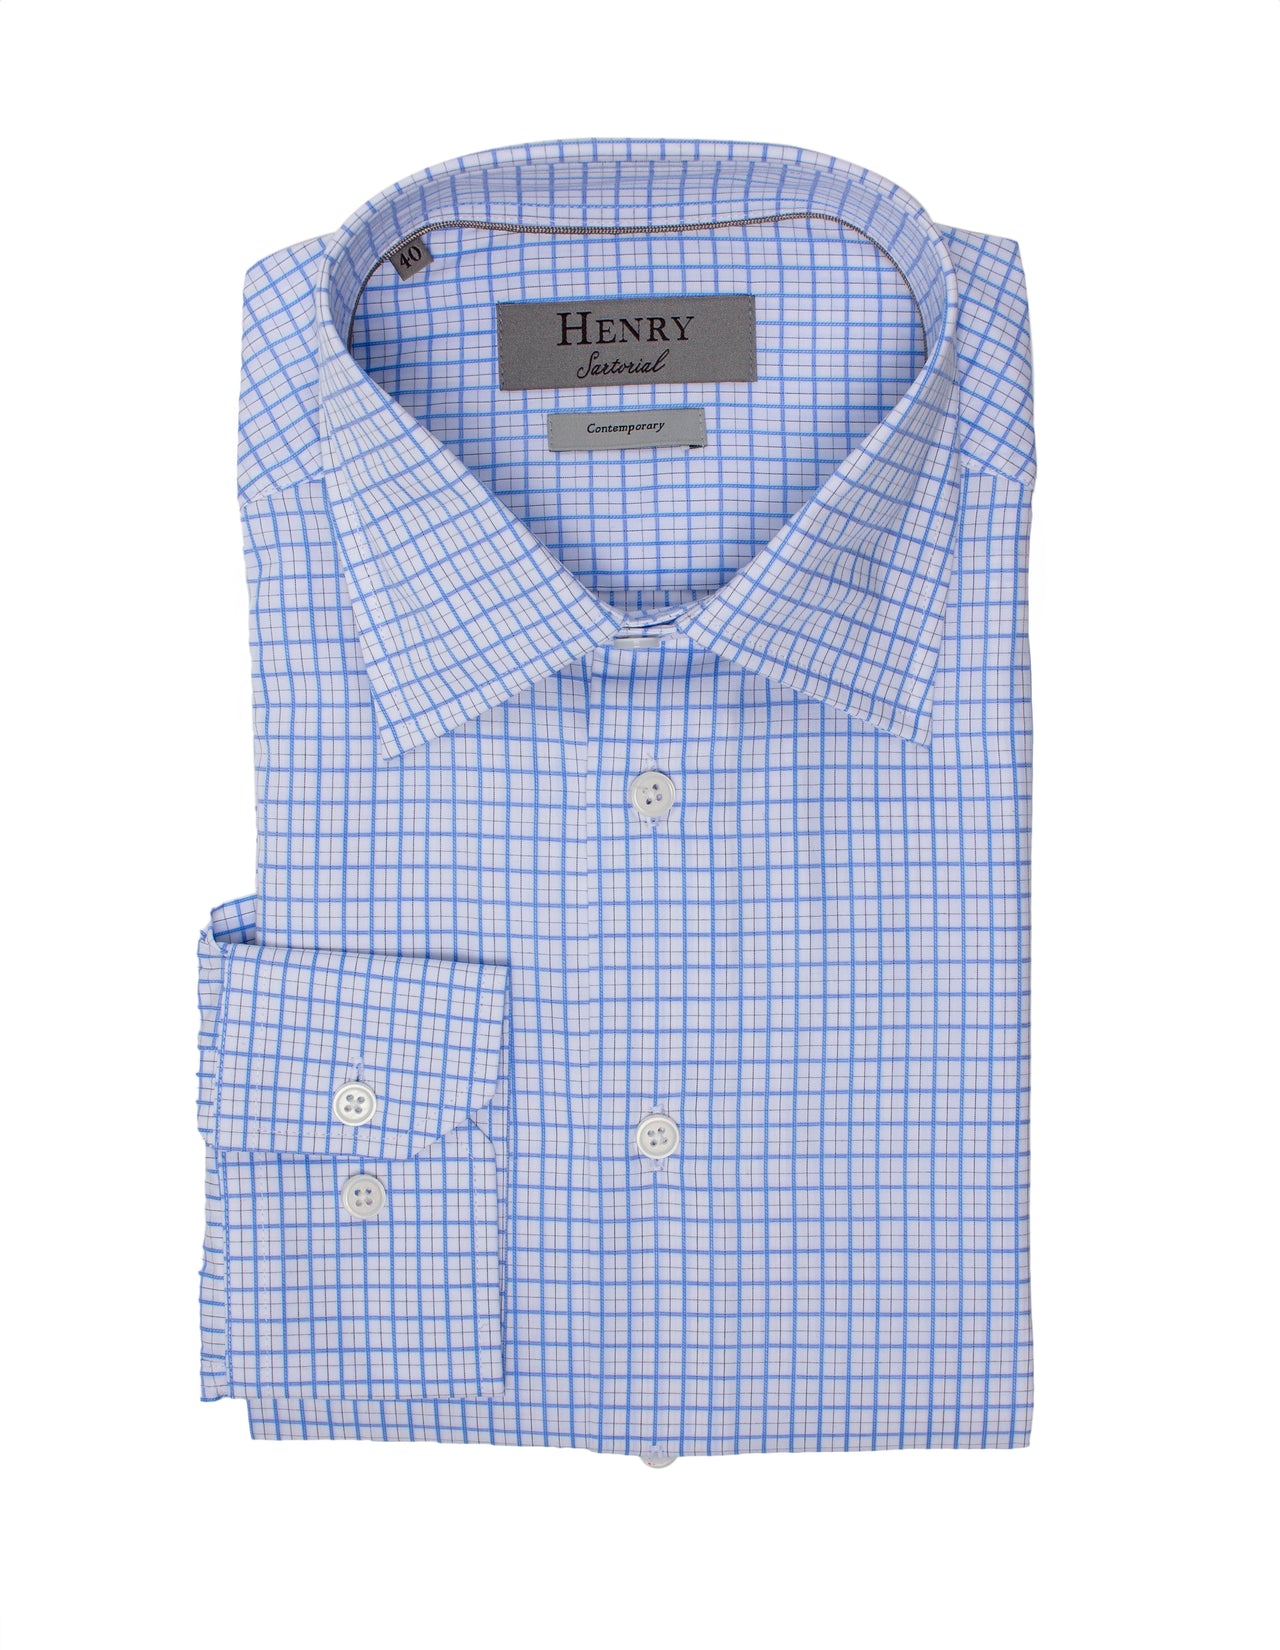 HENRY SARTORIAL Classic Fit Check Shirt BLUE/BROWN